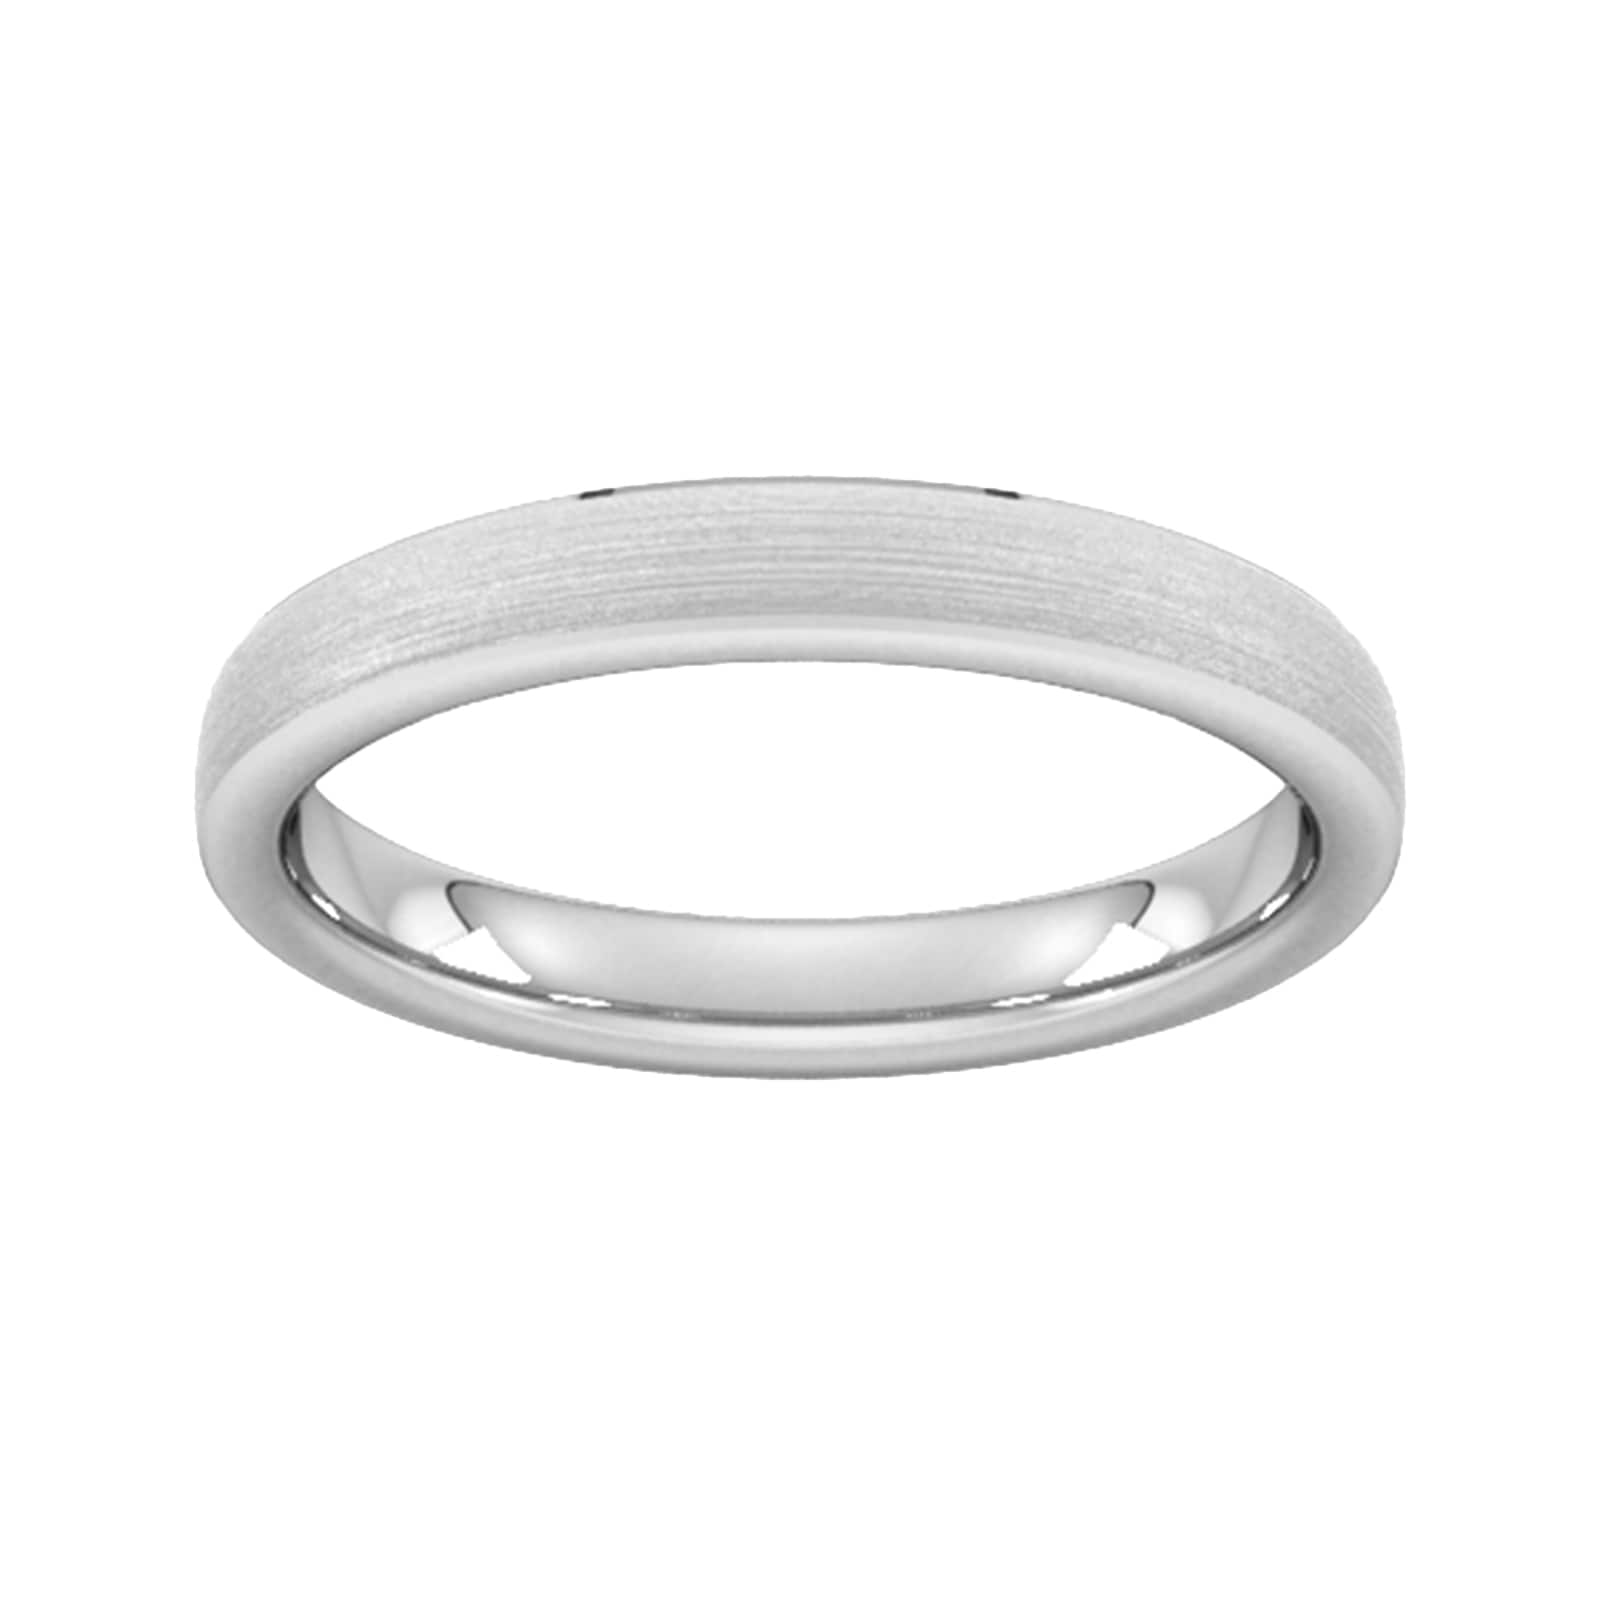 3mm Slight Court Heavy Polished Chamfered Edges With Matt Centre Wedding Ring In 950 Palladium - Ring Size S